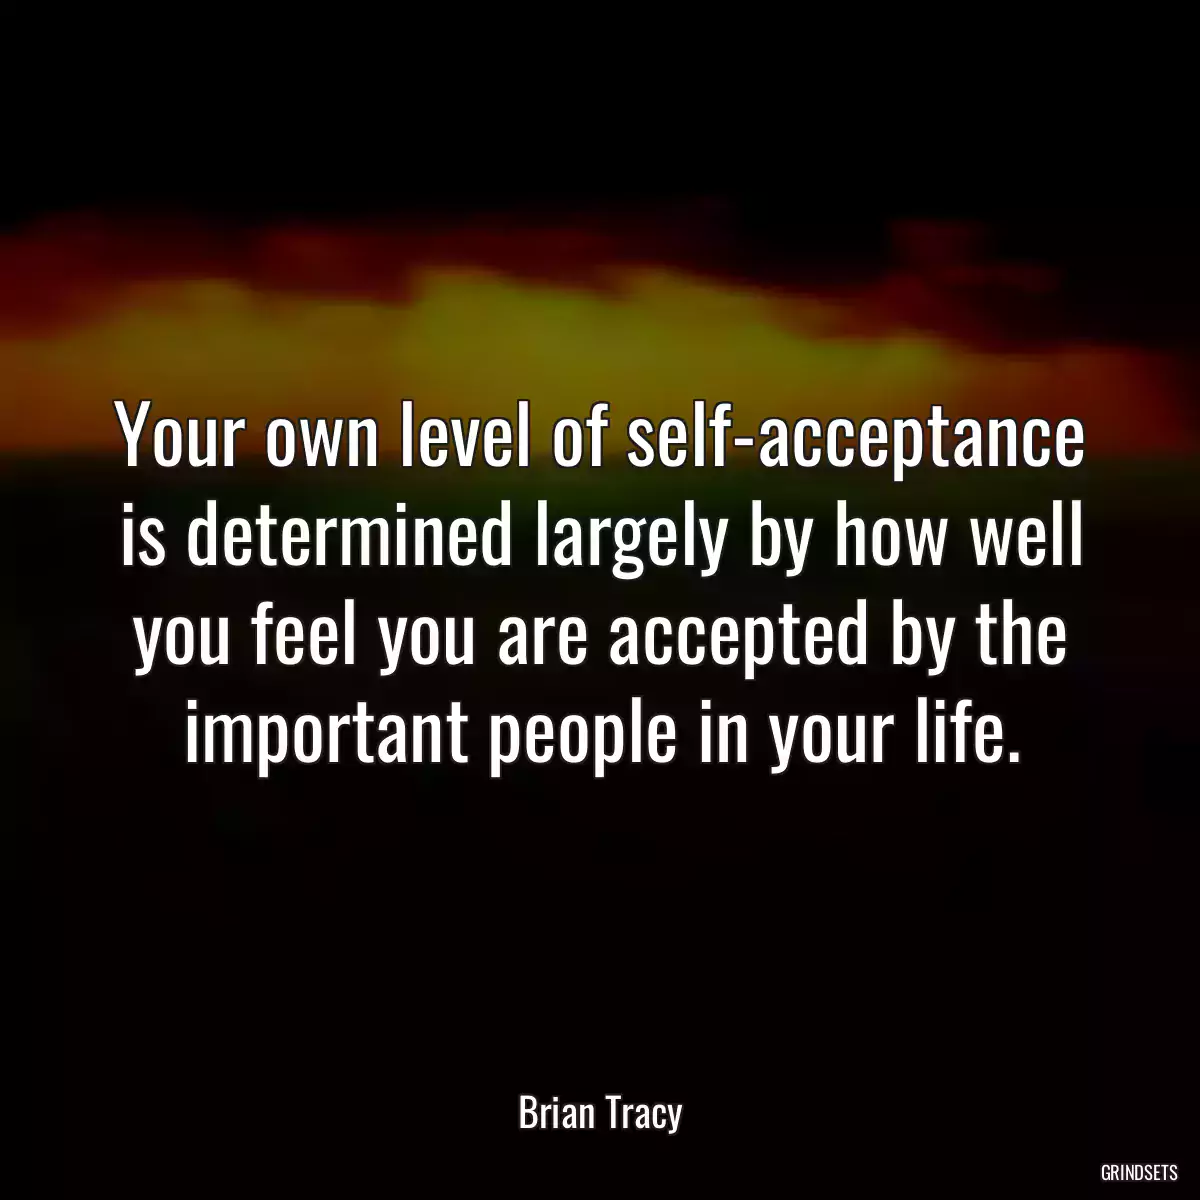 Your own level of self-acceptance is determined largely by how well you feel you are accepted by the important people in your life.